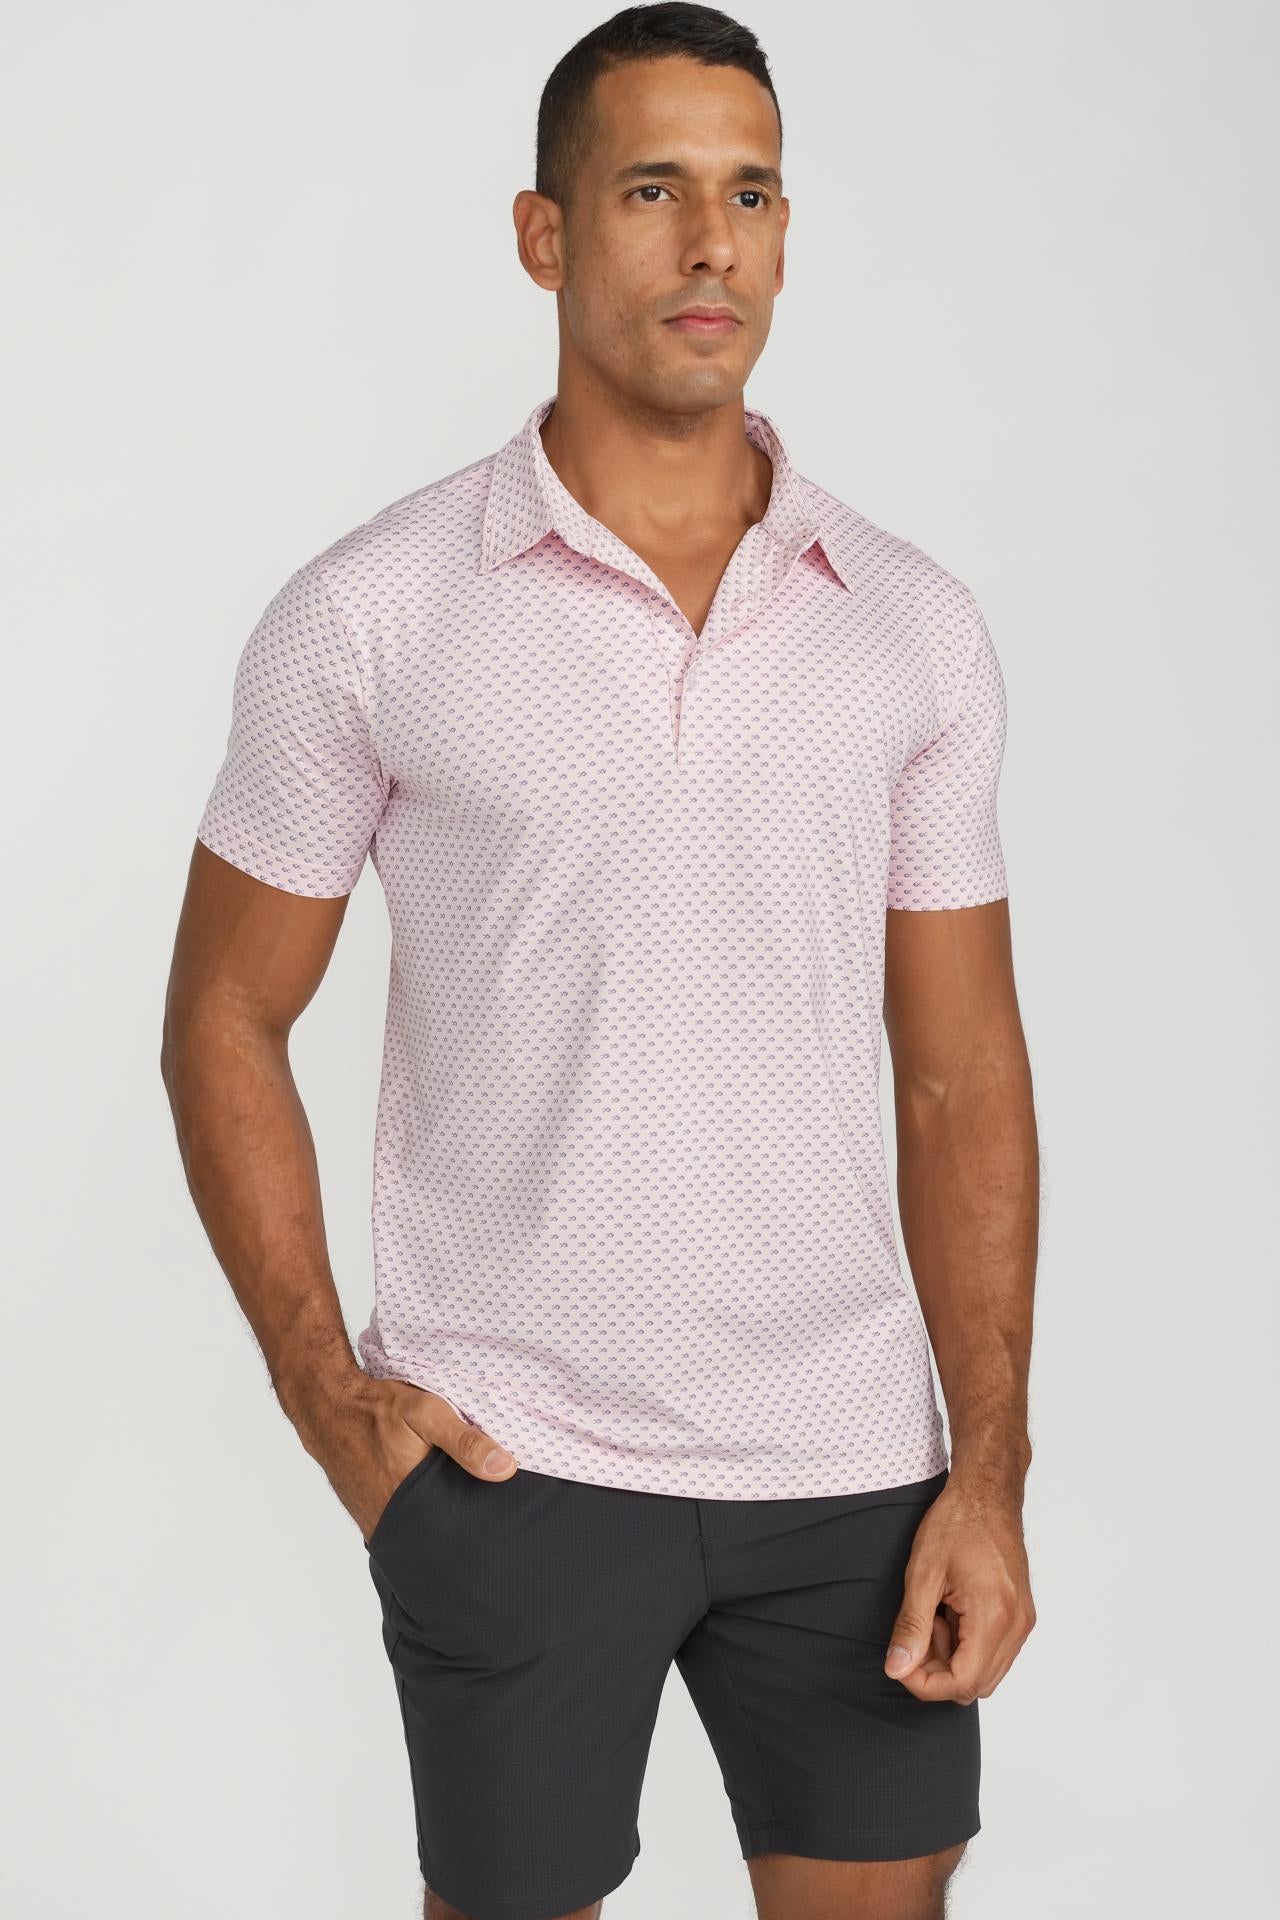 Men's Cooling Performance Golf Polo Shirt Pink